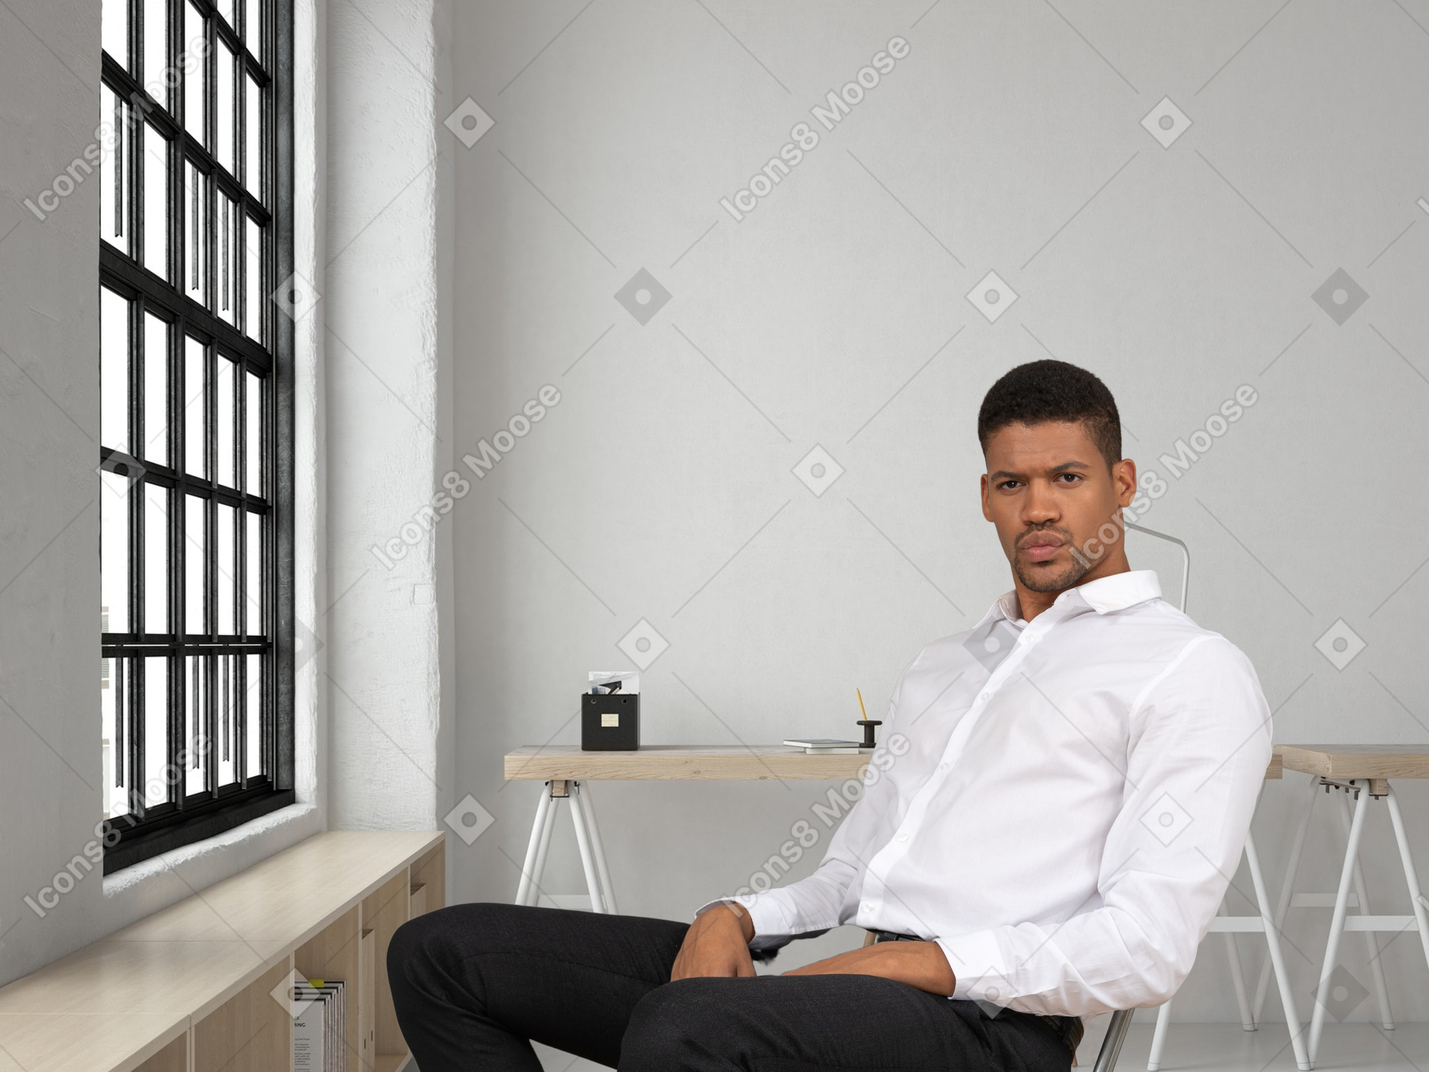 A man in a white shirt sits on a chair in his office